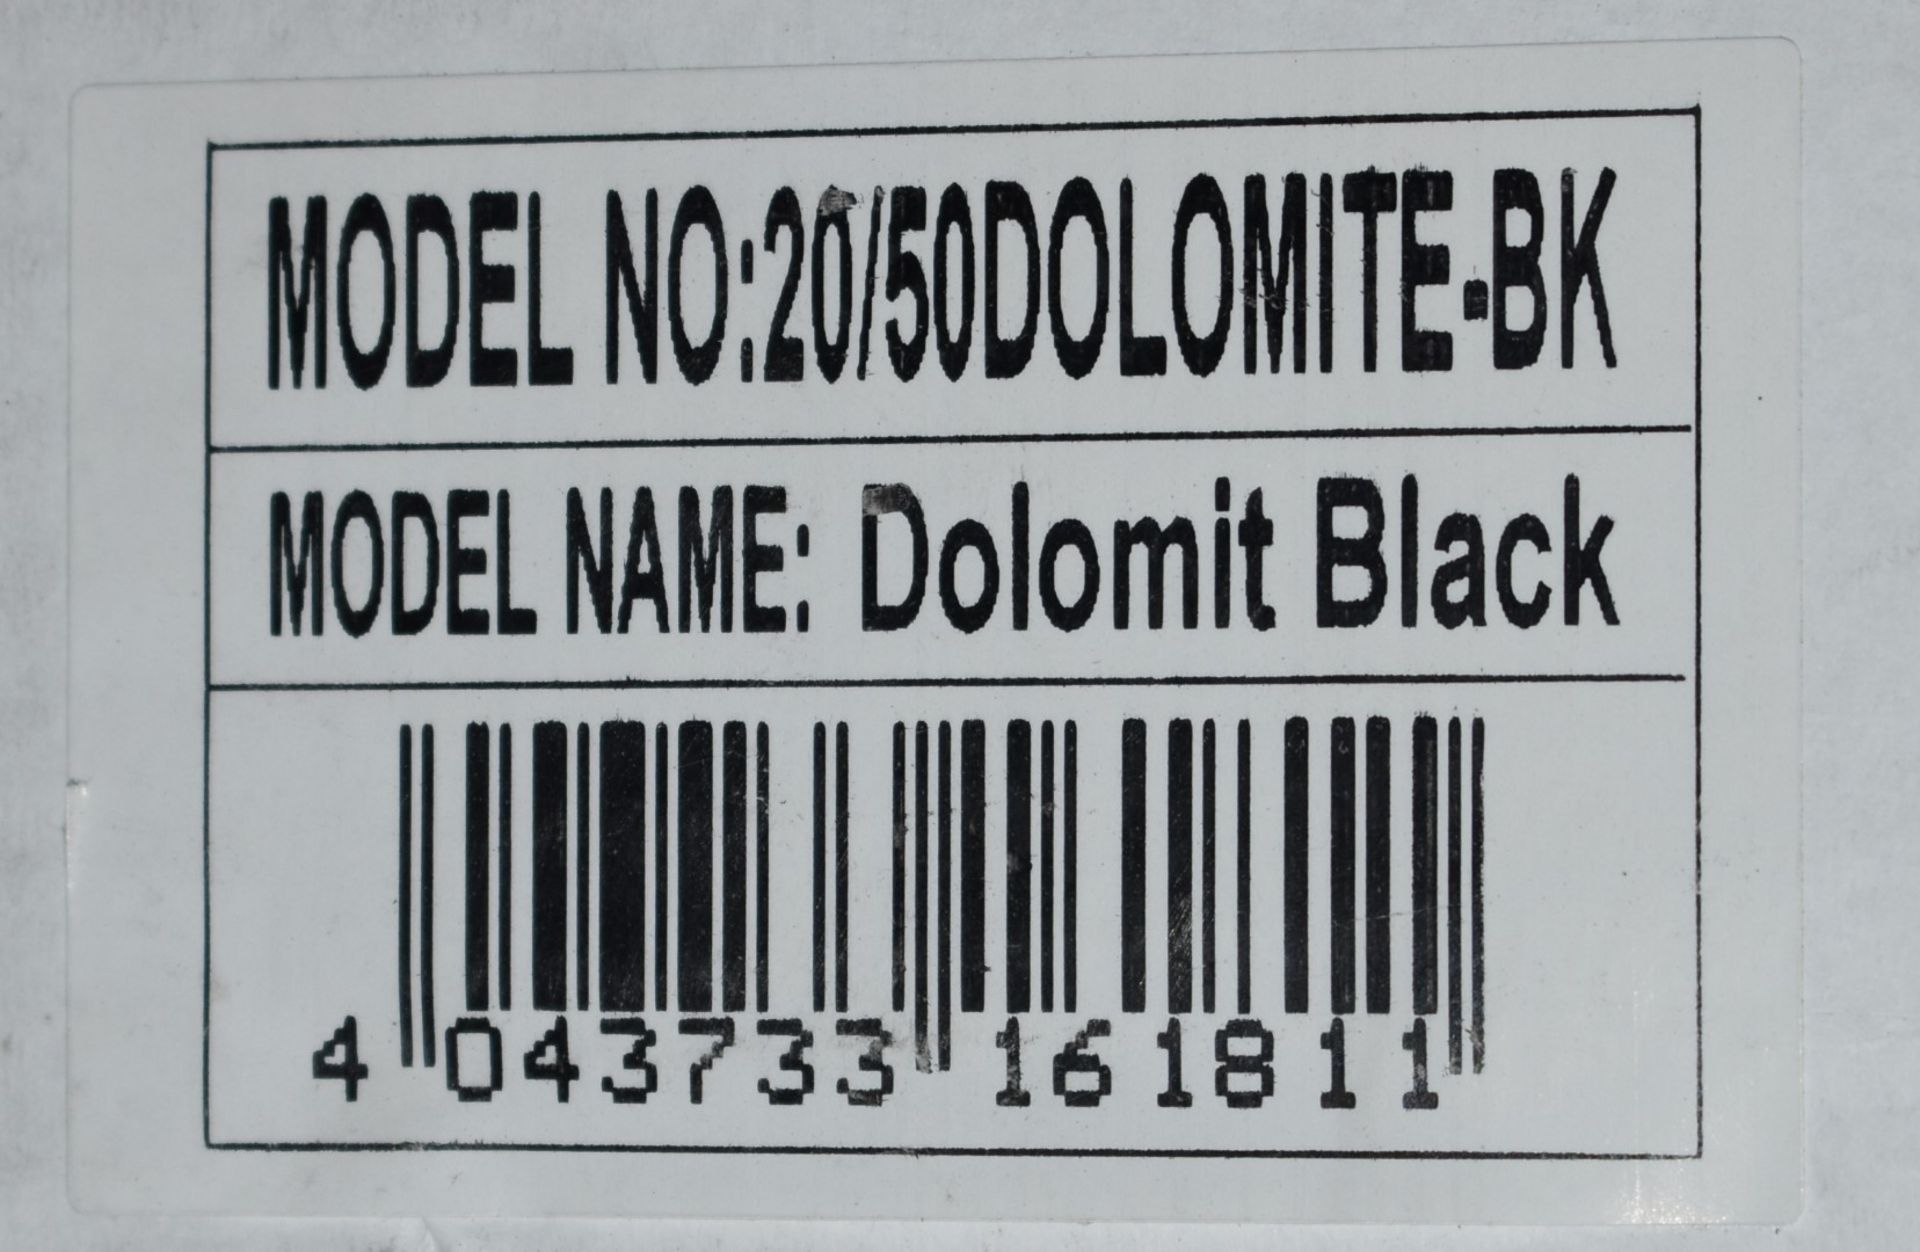 6 x Boxes of RAK Porcelain Floor or Wall Tiles - Dolomit Black - 20 x 50 cm - A Total of 8.4 m² - Image 3 of 9